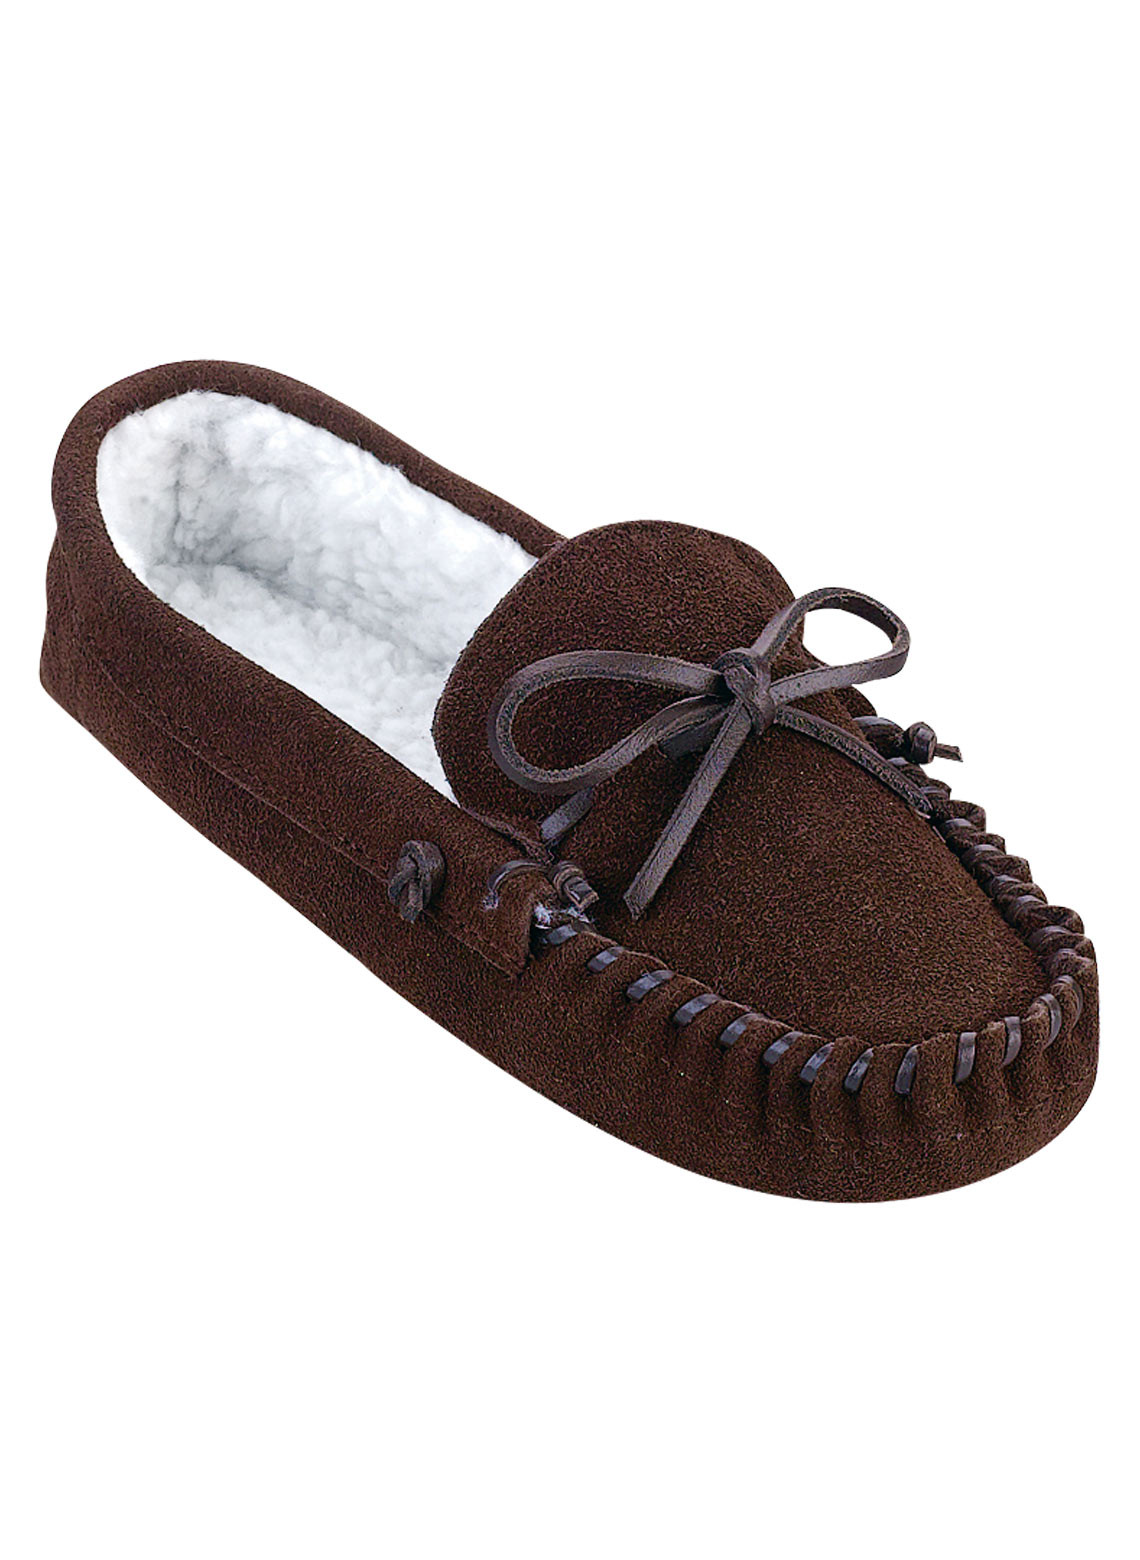 Mens Leather Bedroom Slippers
 Men s Leather Slippers